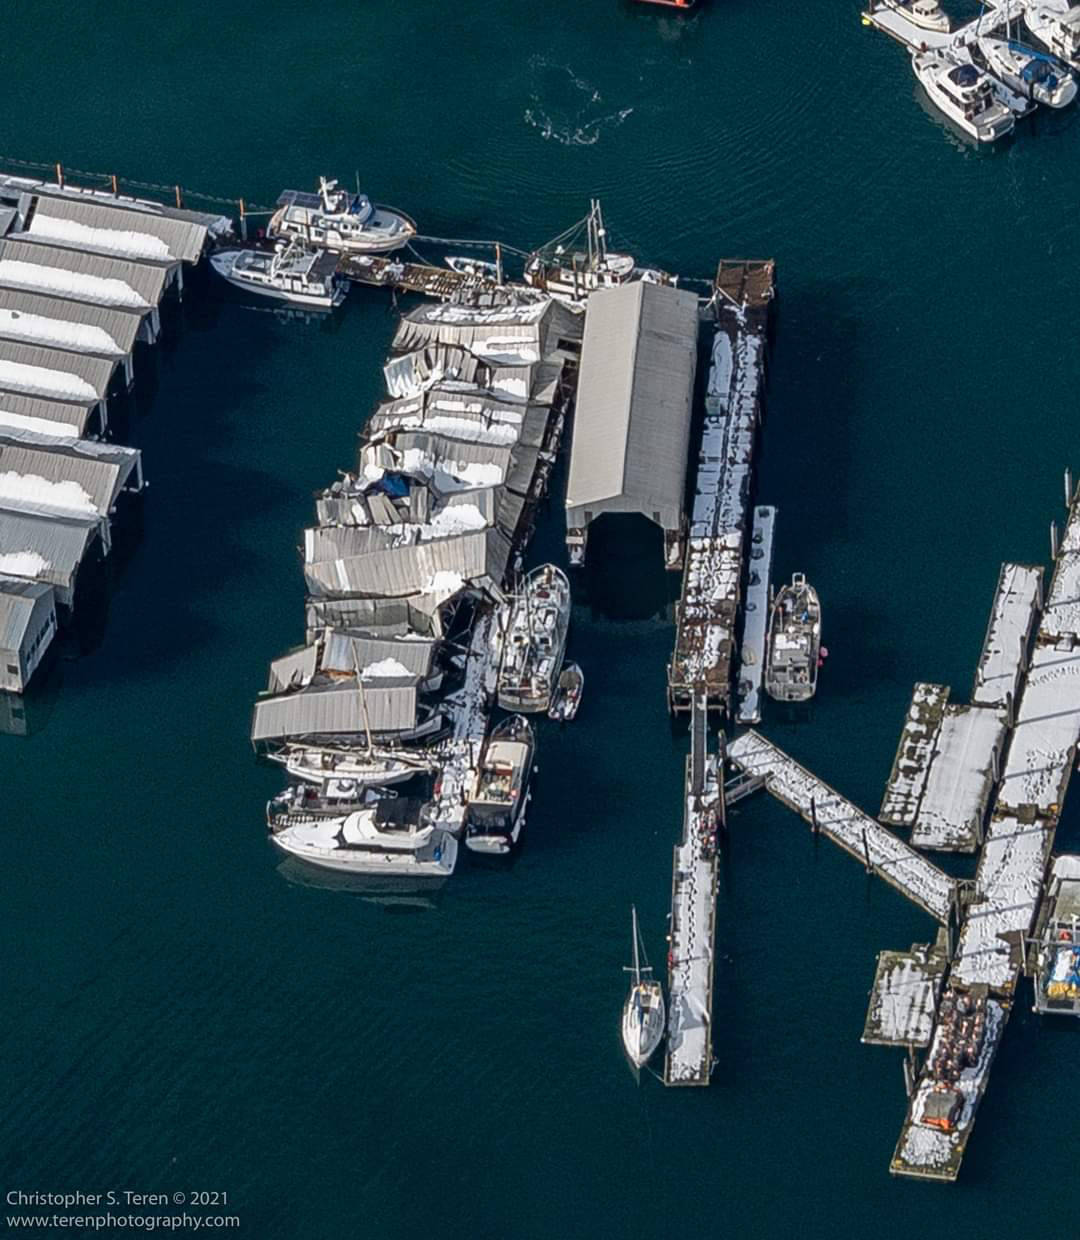 Aerial photo of the Jensen Marina boathouse collapse taken Feb. 15 by Chris Teren, <a href="https://www.terenphotography.com/" target="_blank">www.terenphotography.com/</a>.